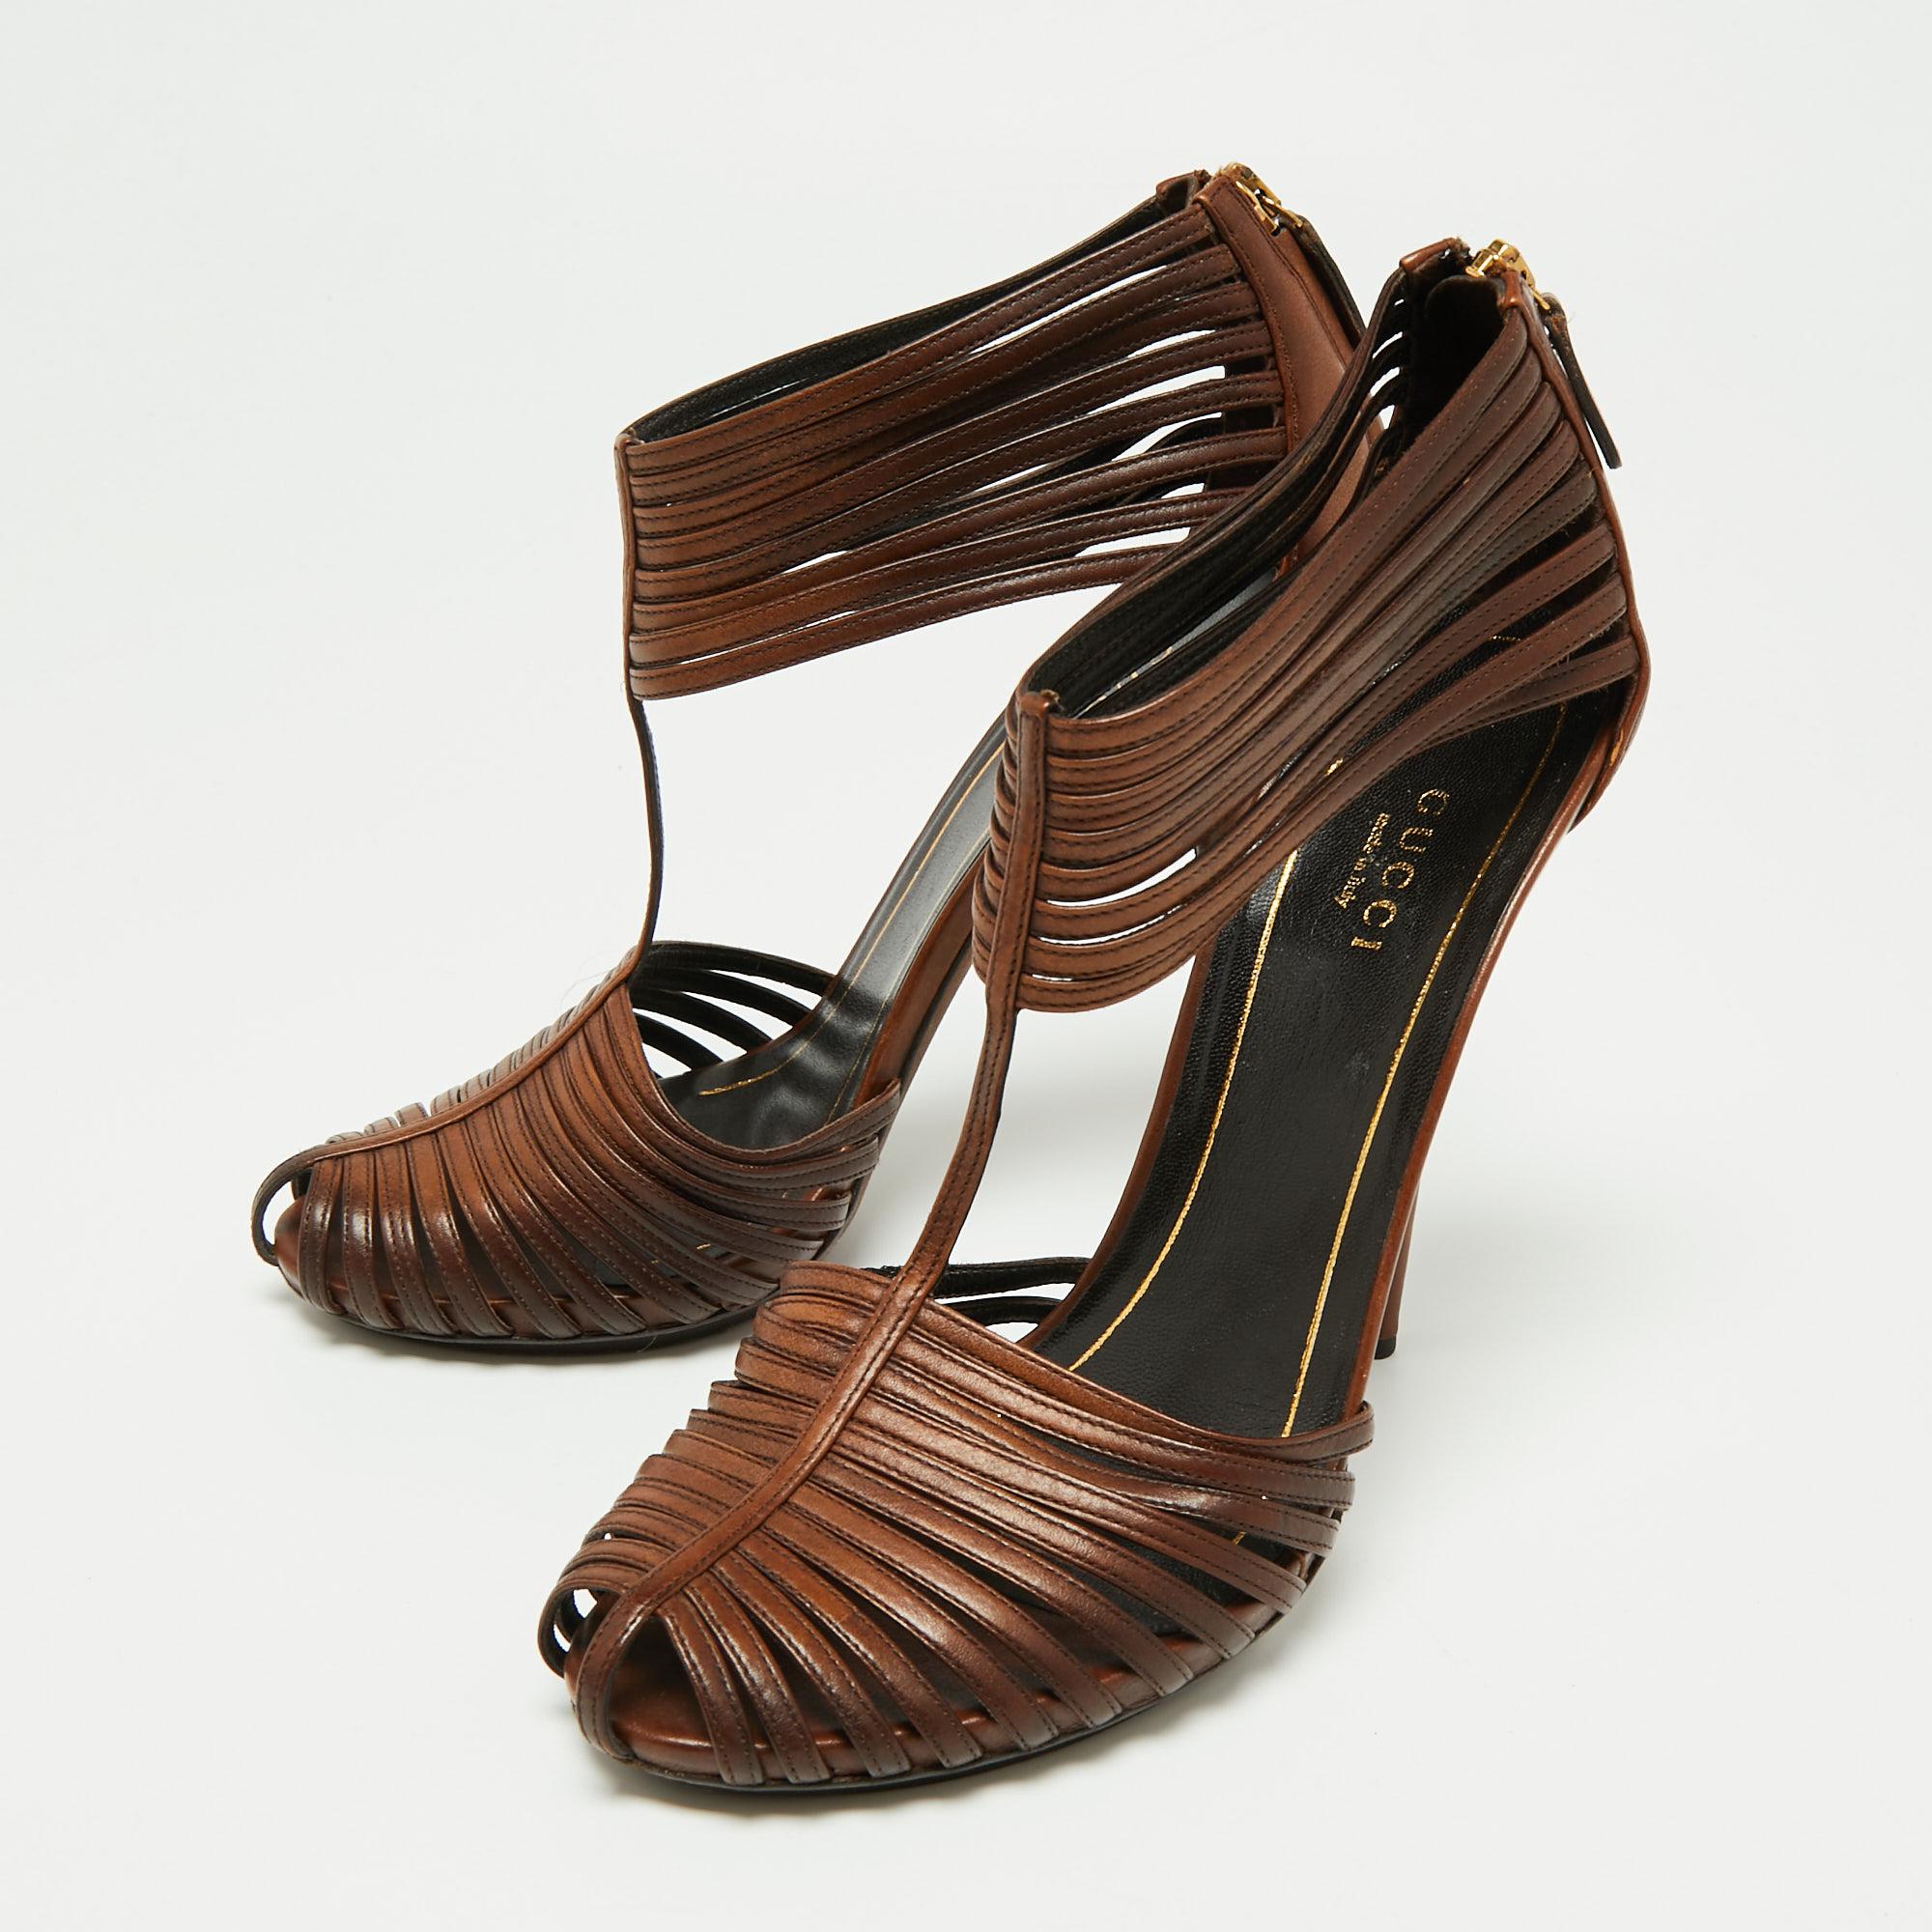 These sandals from Gucci are absolutely breathtaking! They are crafted from brown leather in a strappy layout with round toes and zippers on the counters. Balanced on 12.5 cm heels, this lovely pair will have everyone in admiration.

